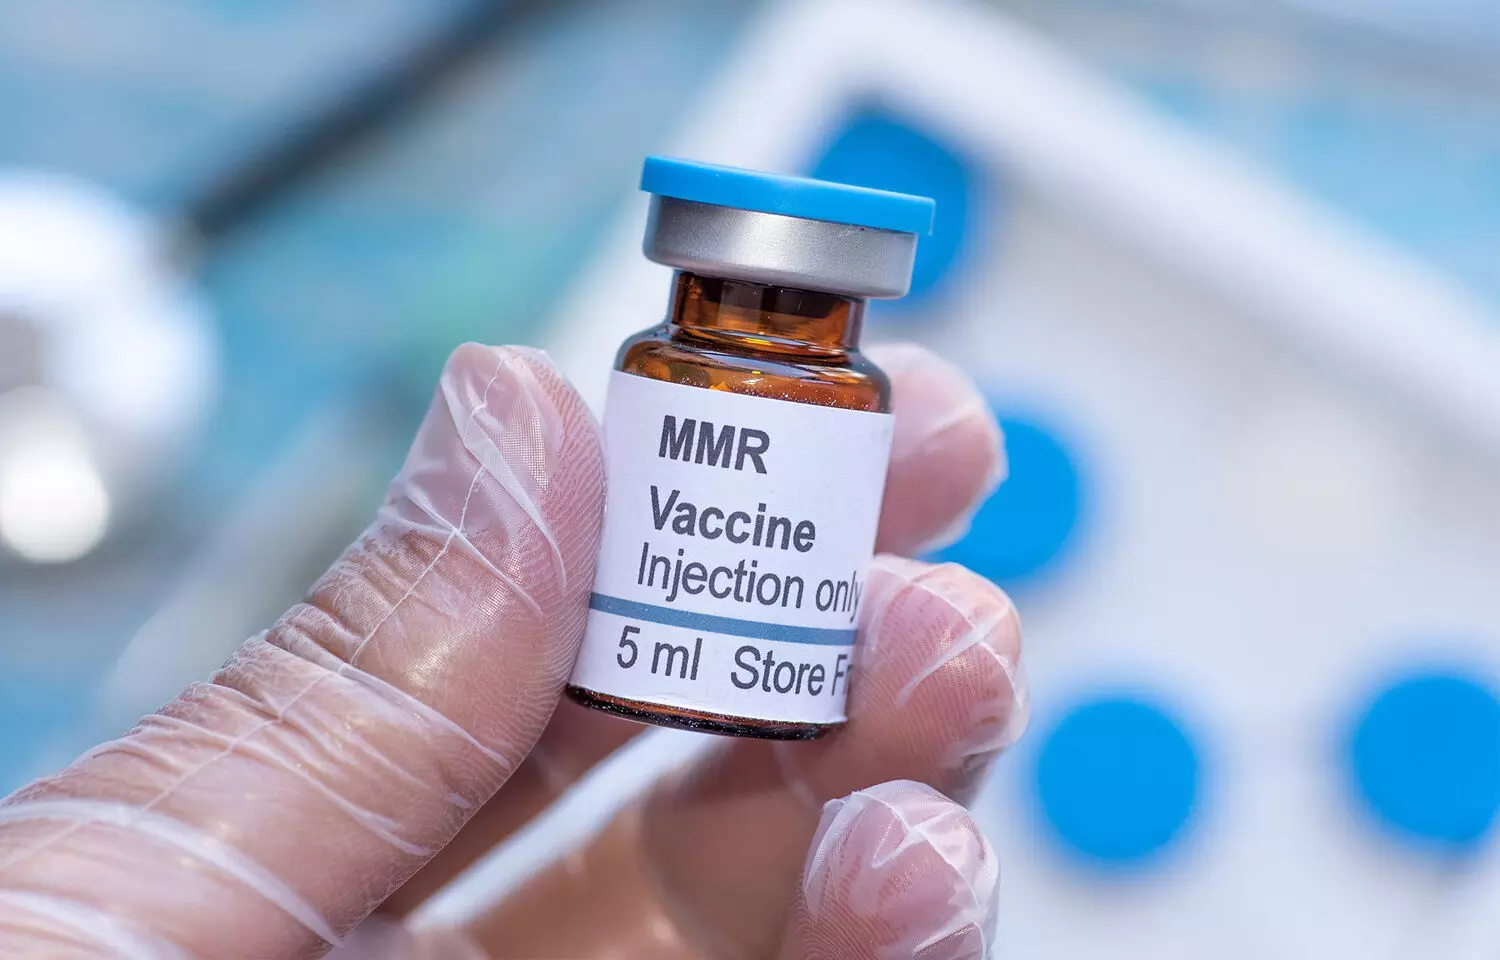 MMR vaccine dosage does not provide herd immunity in mumps outbreak, Finds study